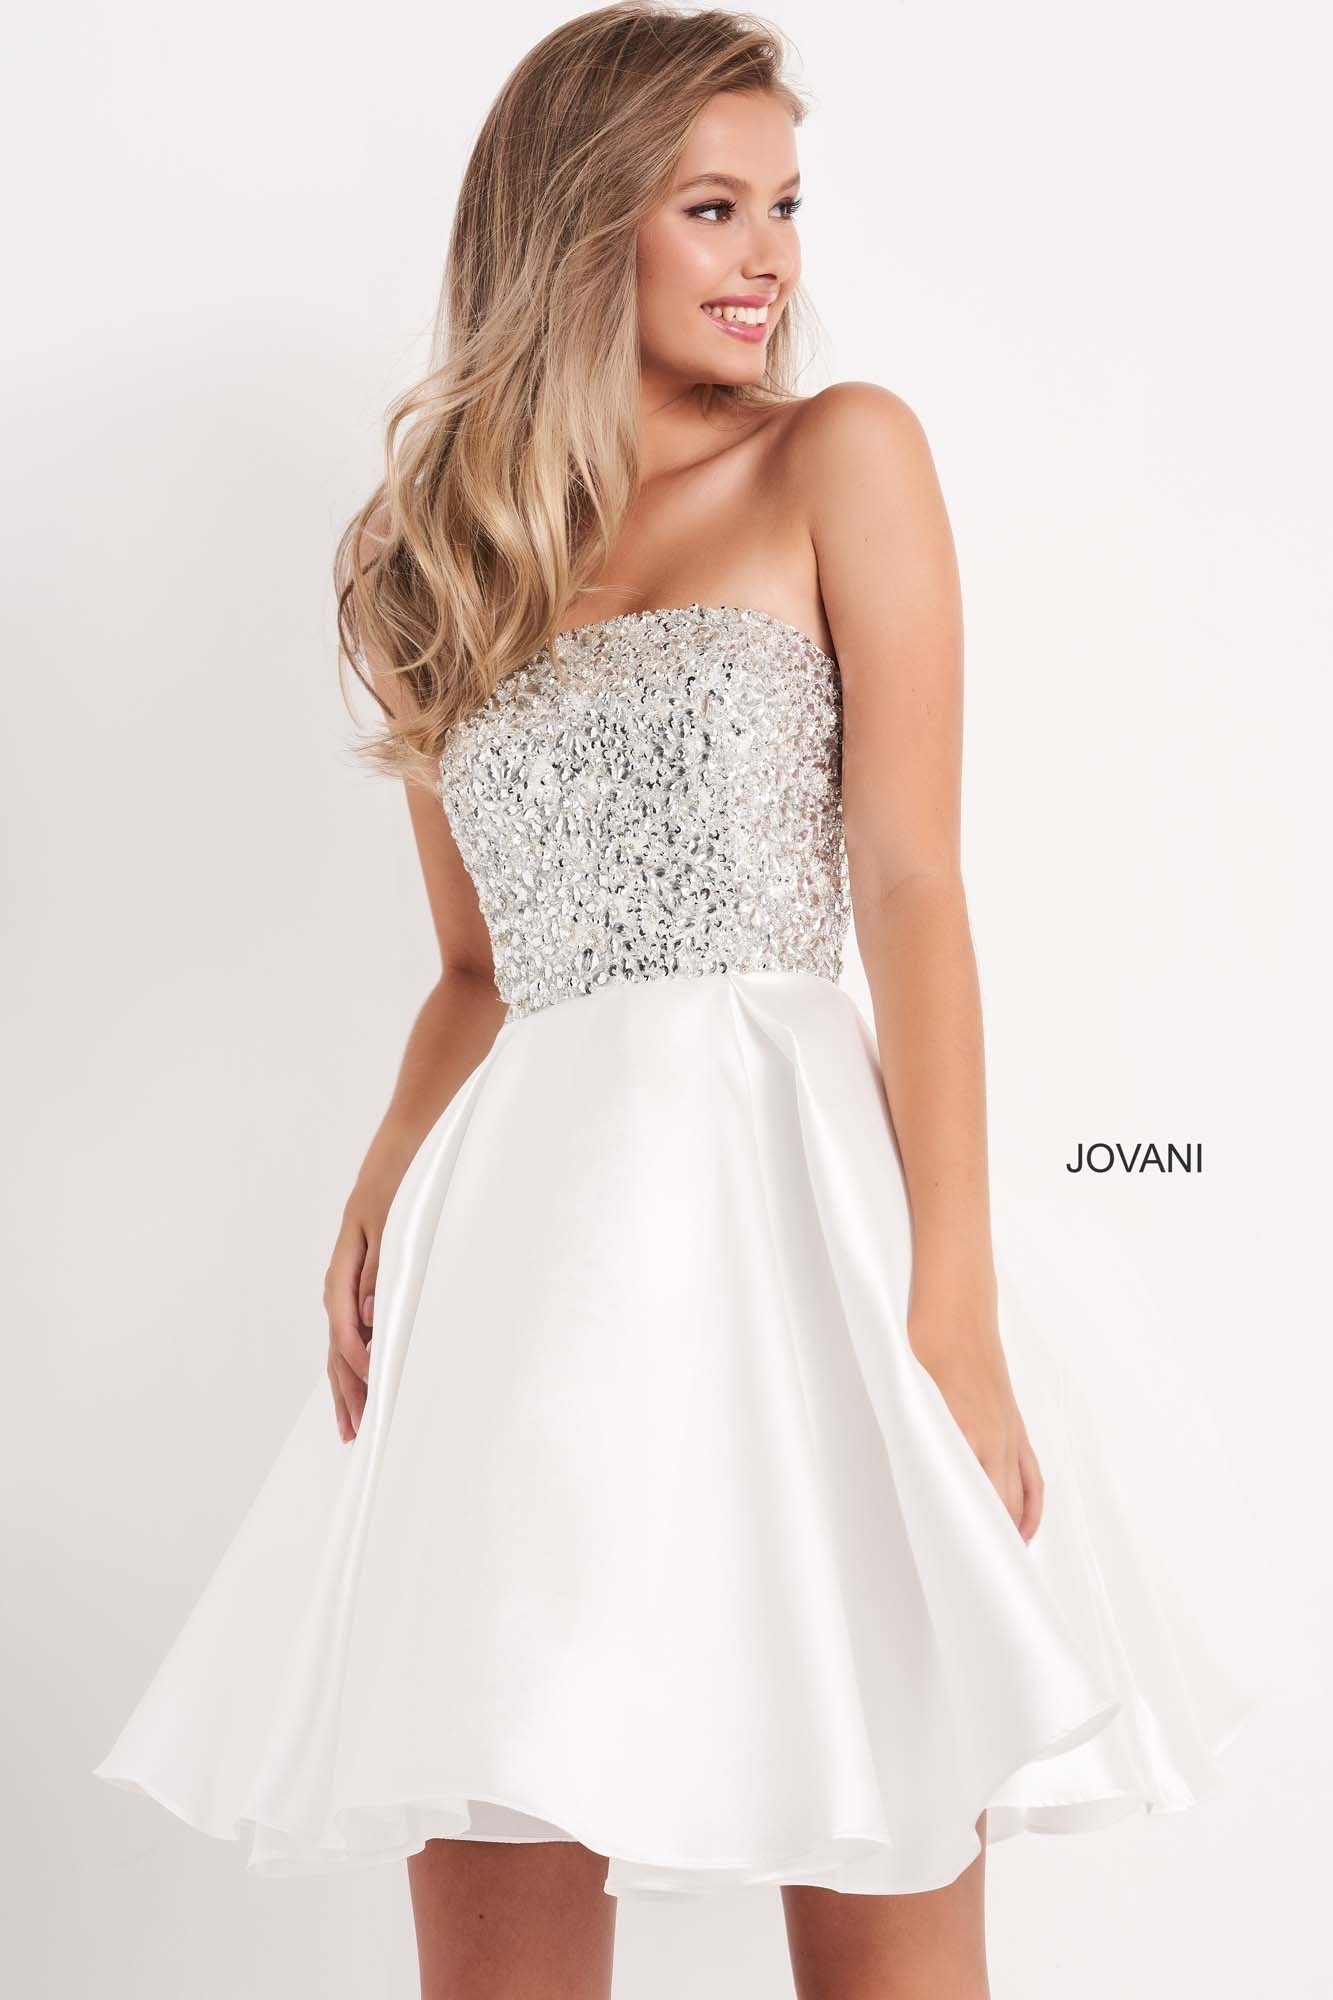 Jovani K00722 Fit and Flare Strapless Girls Dress